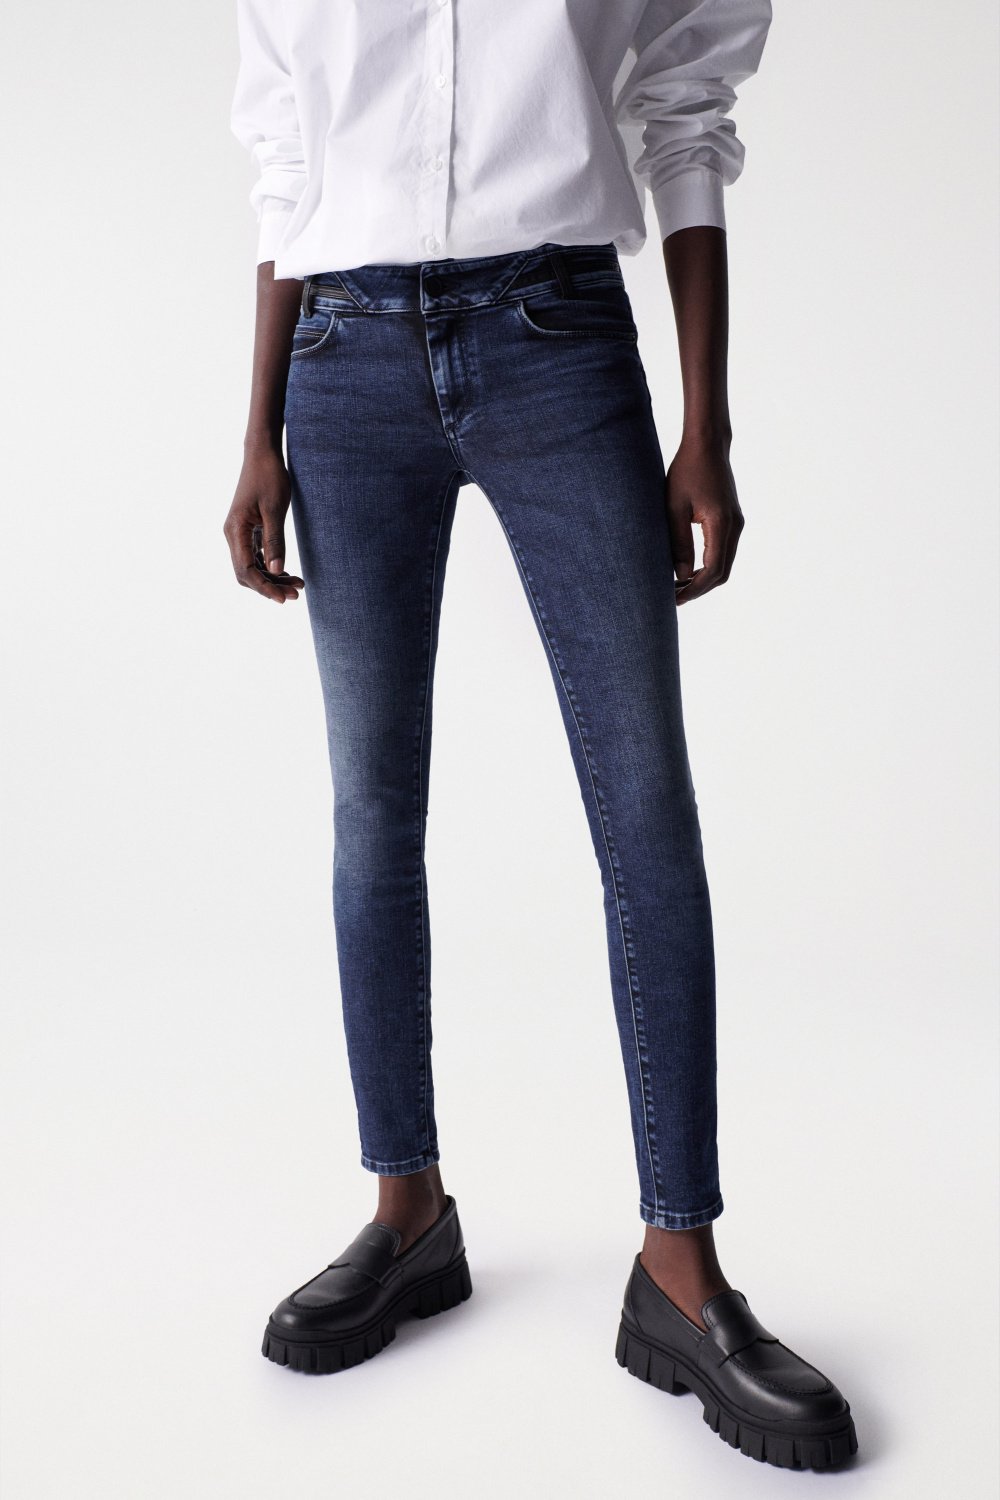 Skinny Push Up Wonder jeans with Nappa details - Salsa